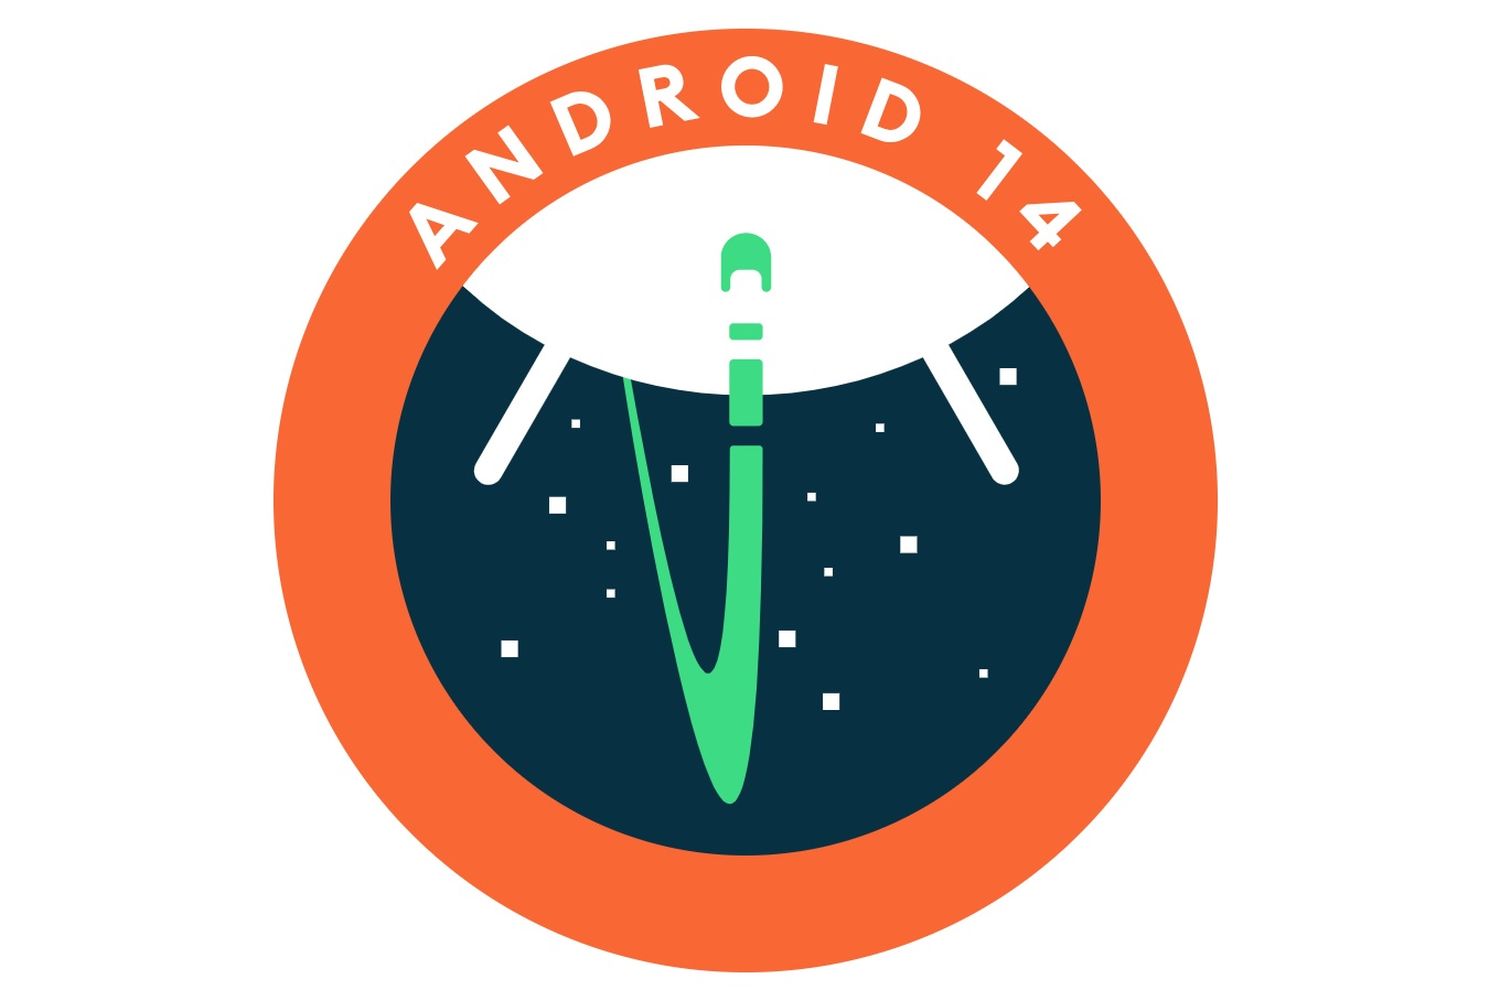 android 14 logo